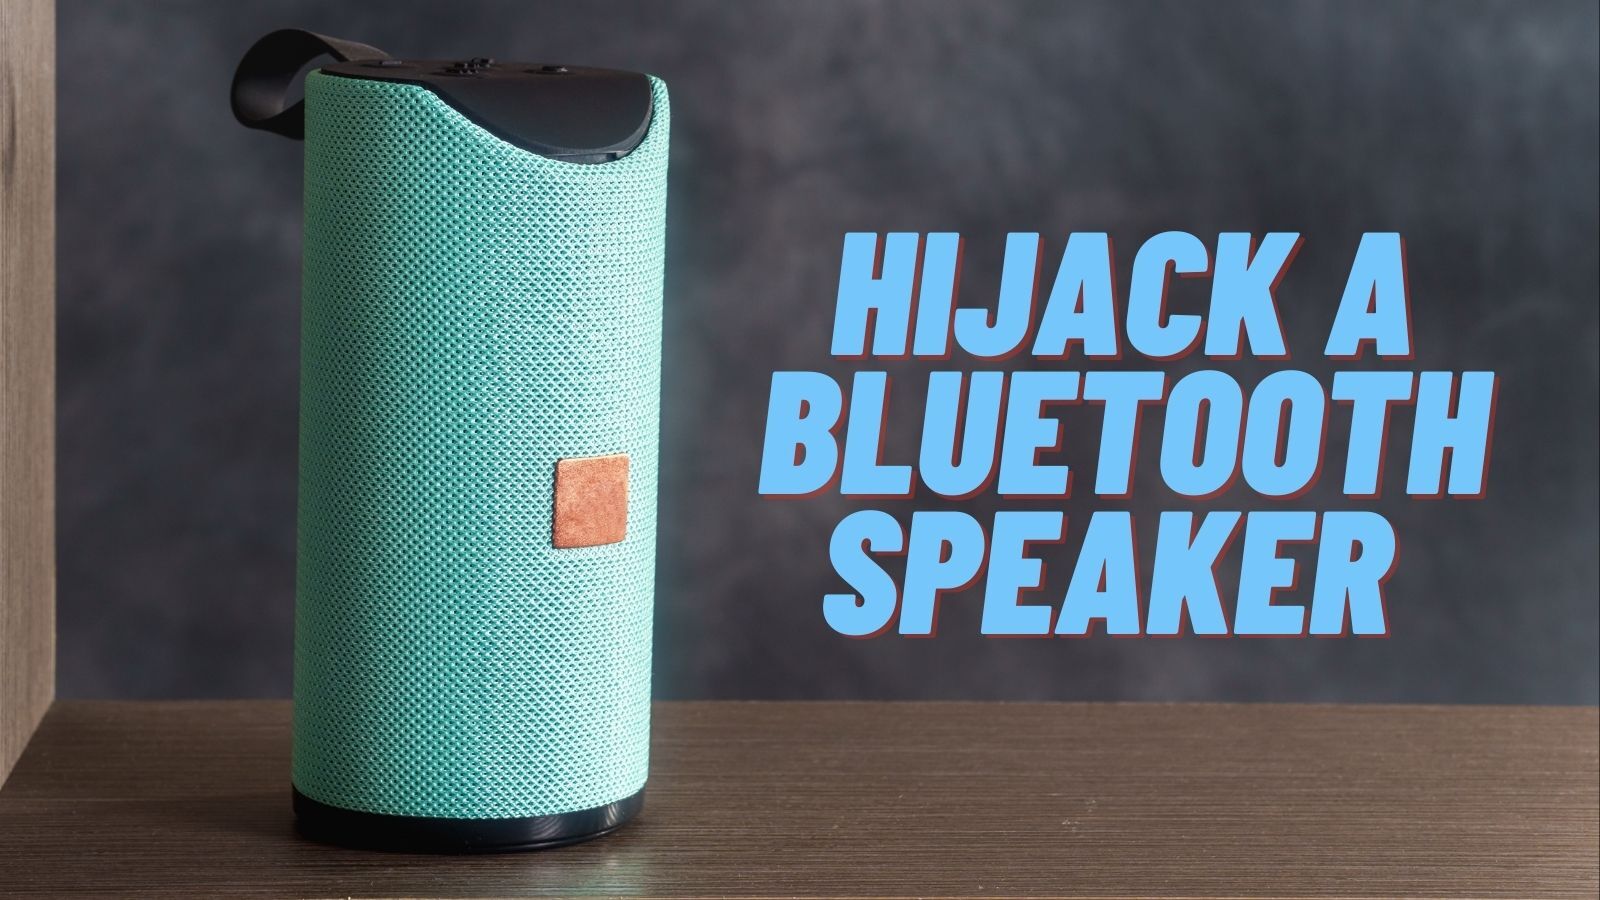 How to Hijack a Bluetooth Speaker? (Basic and Advanced Methods)